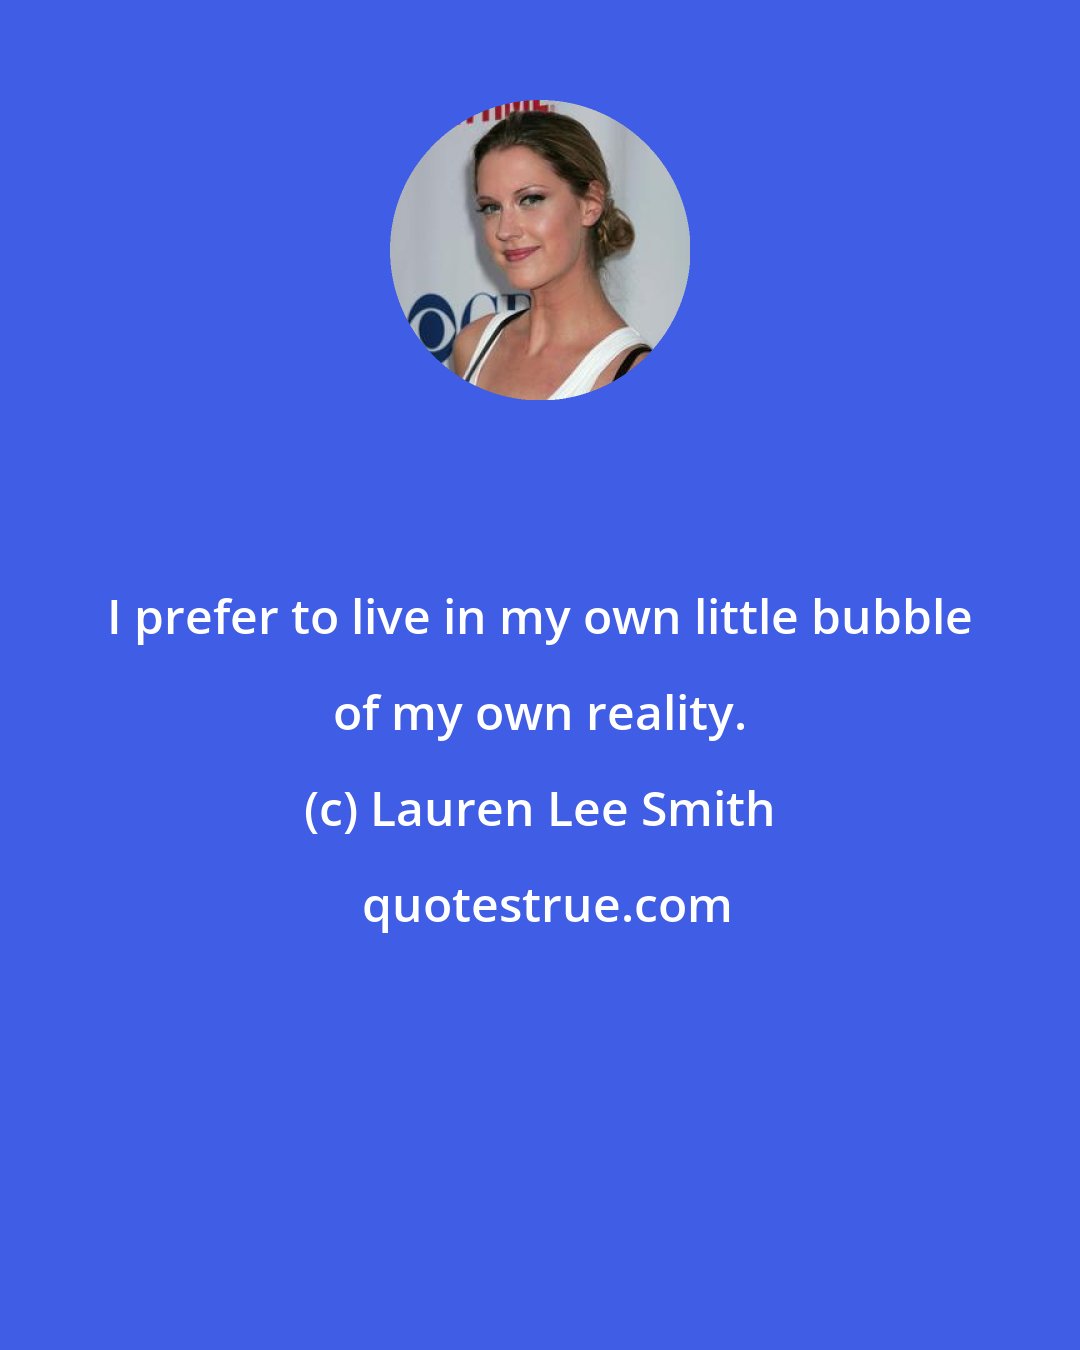 Lauren Lee Smith: I prefer to live in my own little bubble of my own reality.